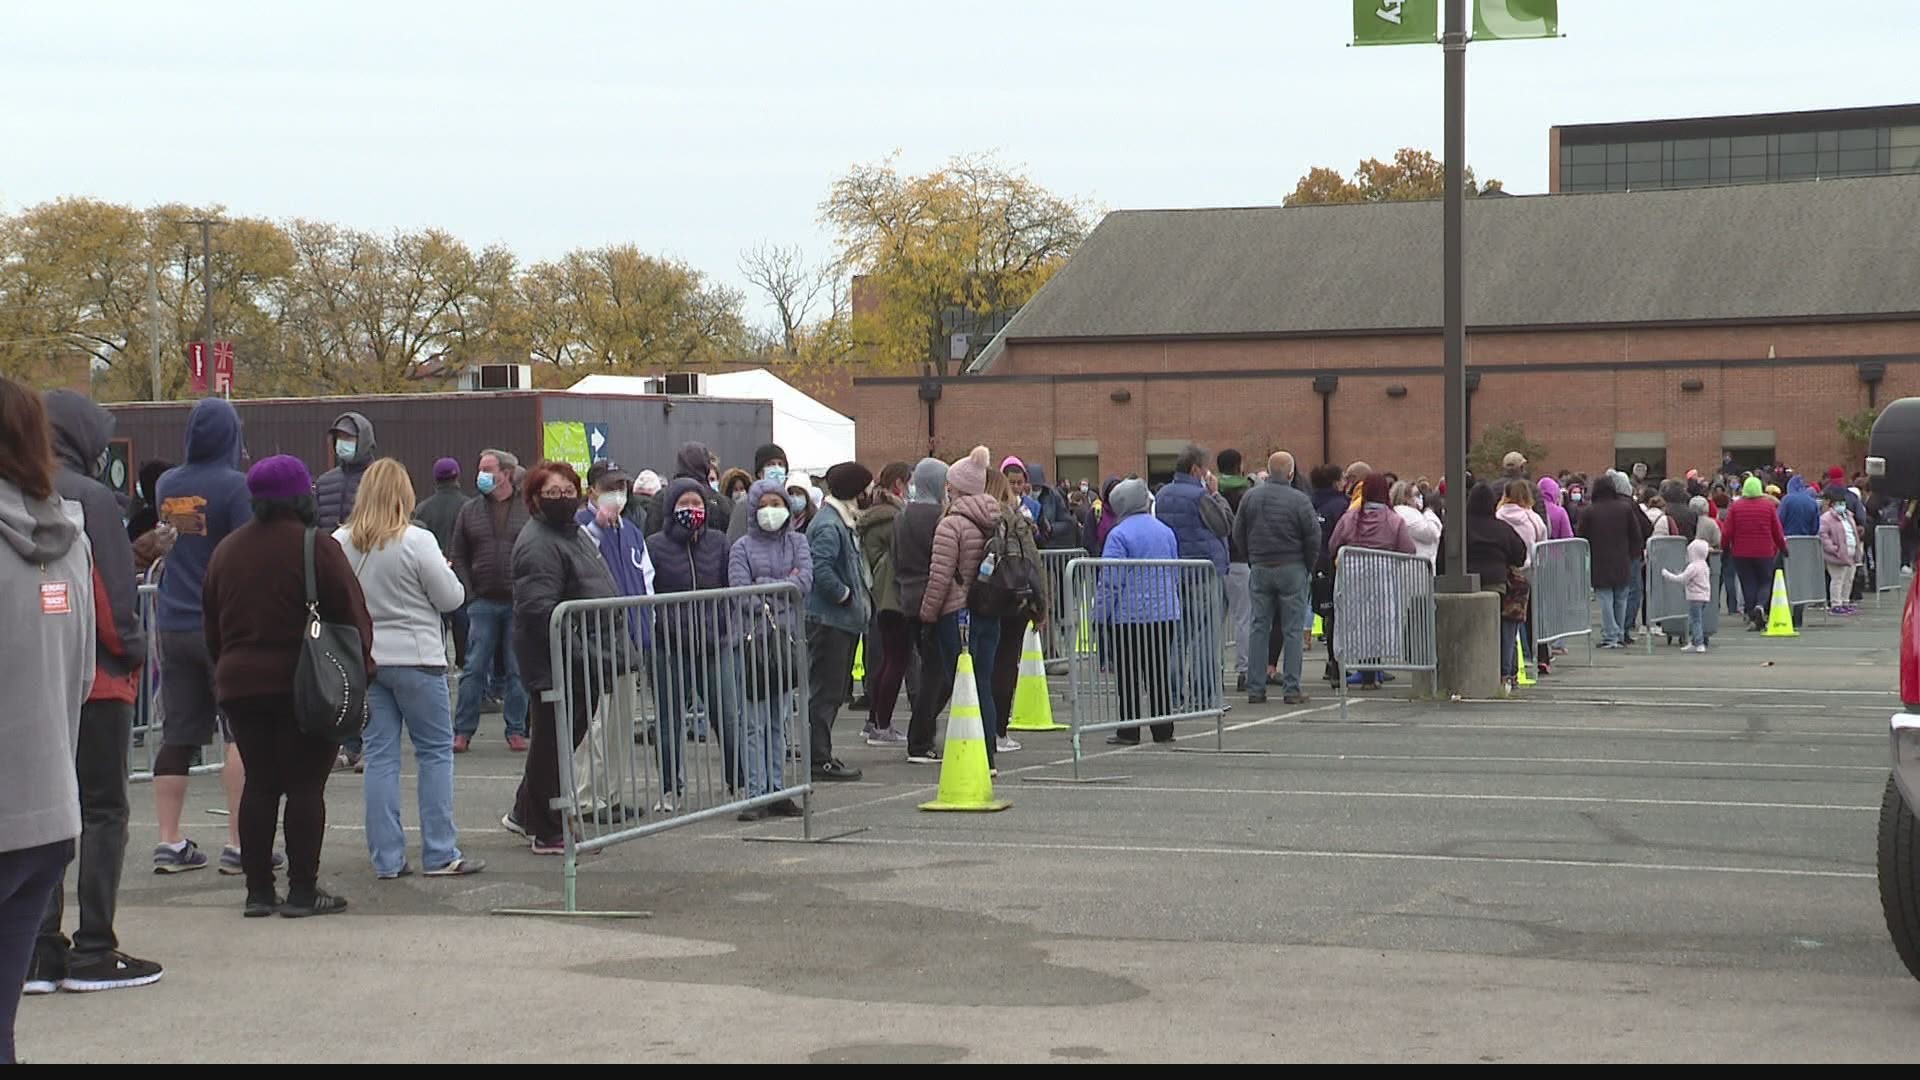 In just the last couple of hours, Marion County announced it will extend early voting hours after the long lines and wait times we've seen the past few days.